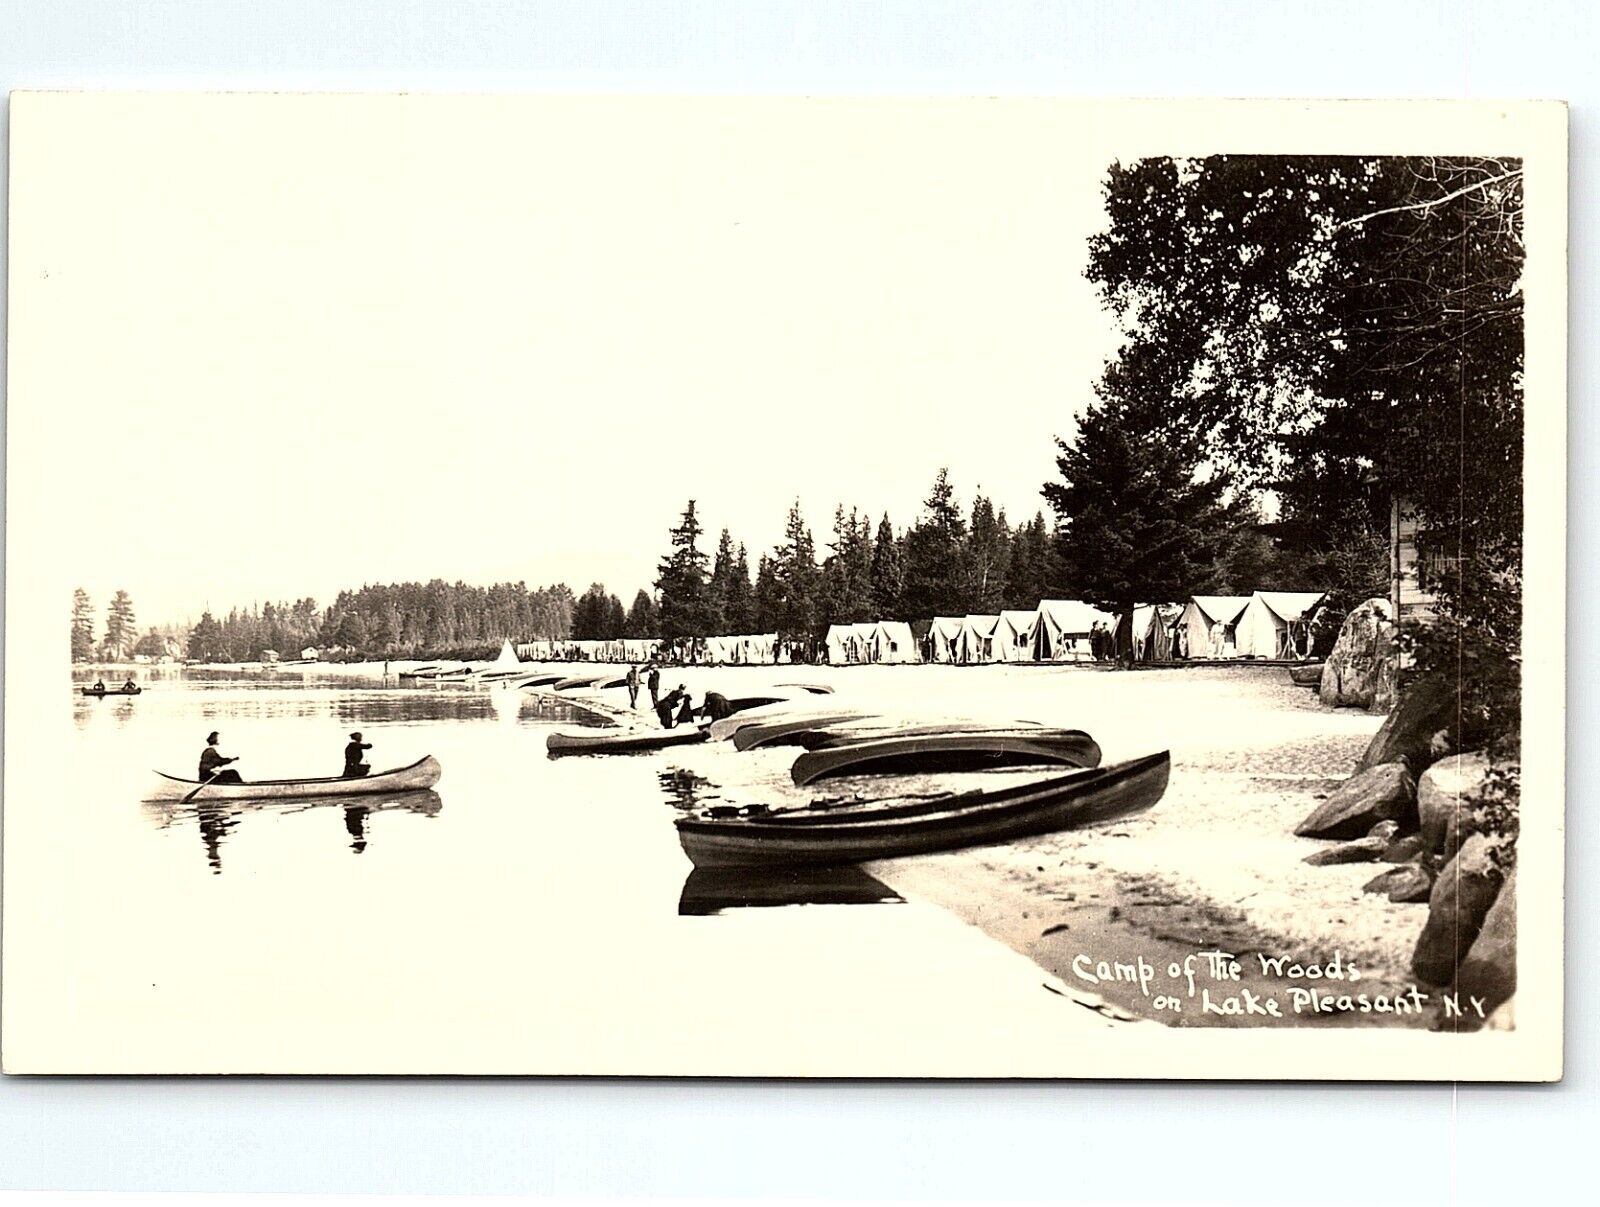 1920s SPECULATOR NY CAMP-OF-THE-WOODS TENTS BOATING SHORE RPPC POSTCARD P2846